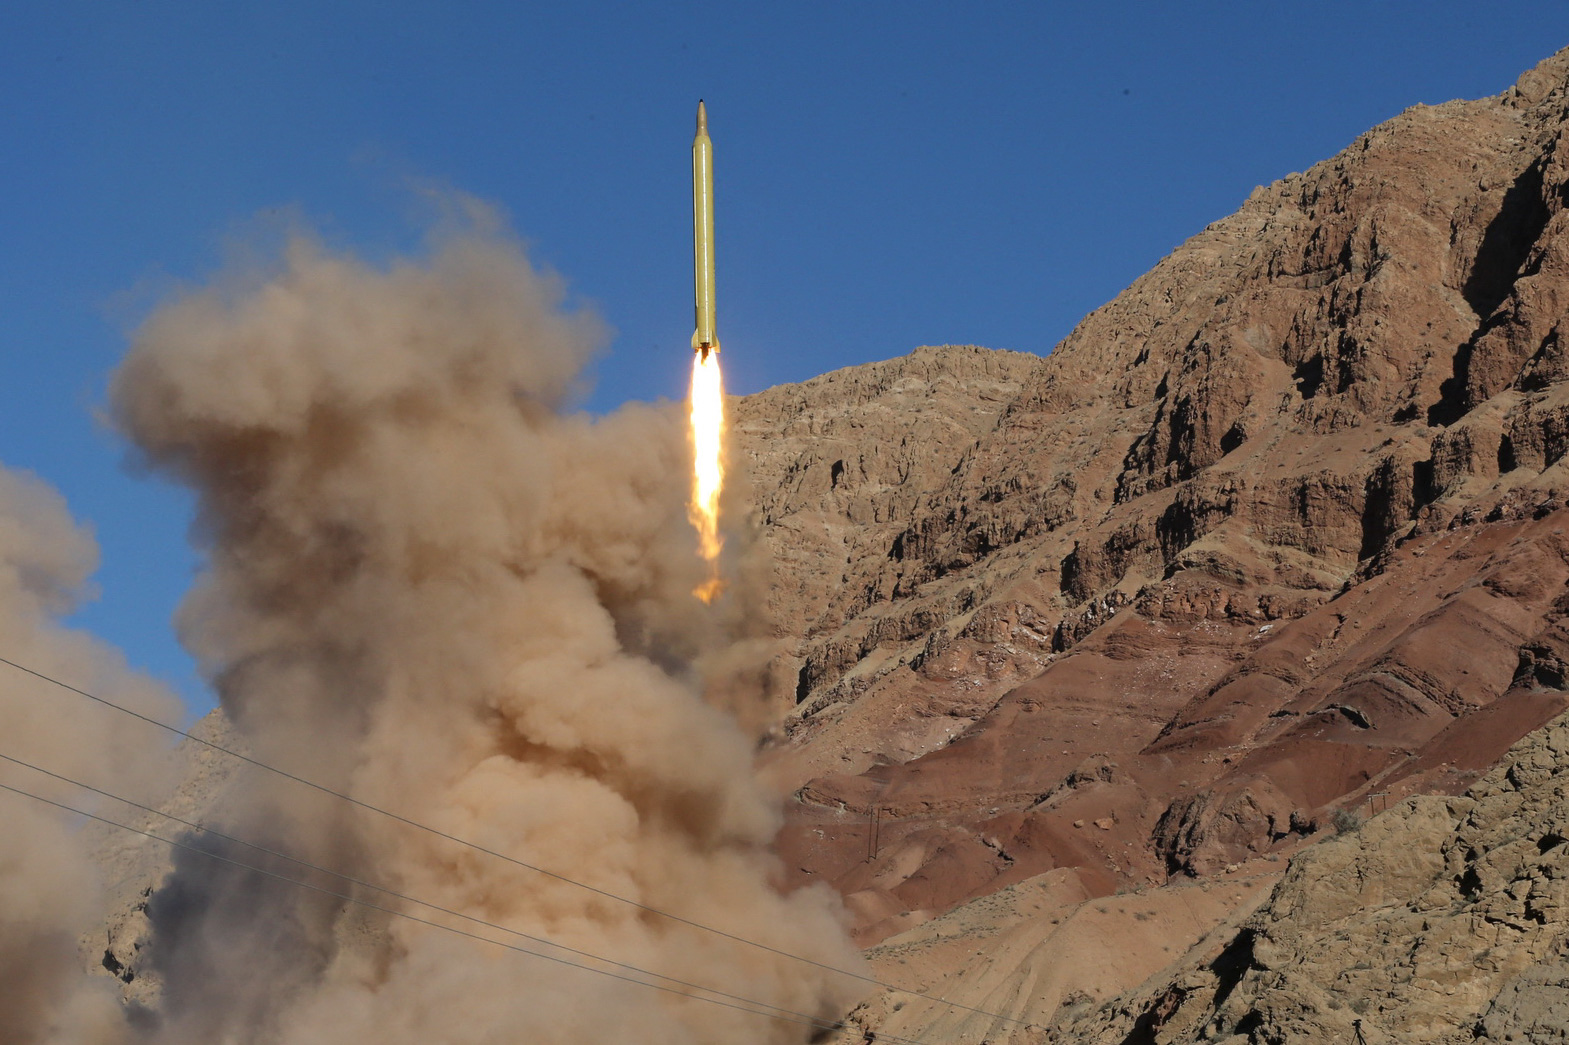 TOPSHOT - A long-range Qadr ballistic missile is launched in the Alborz mountain range in northern Iran on March 9, 2016. Iran said its armed forces had fired two more ballistic missiles as it continued tests in defiance of US warnings. (Photo by Mahmood Hosseini / TASNIM NEWS / AFP) (Photo by MAHMOOD HOSSEINI/TASNIM NEWS/AFP via Getty Images)